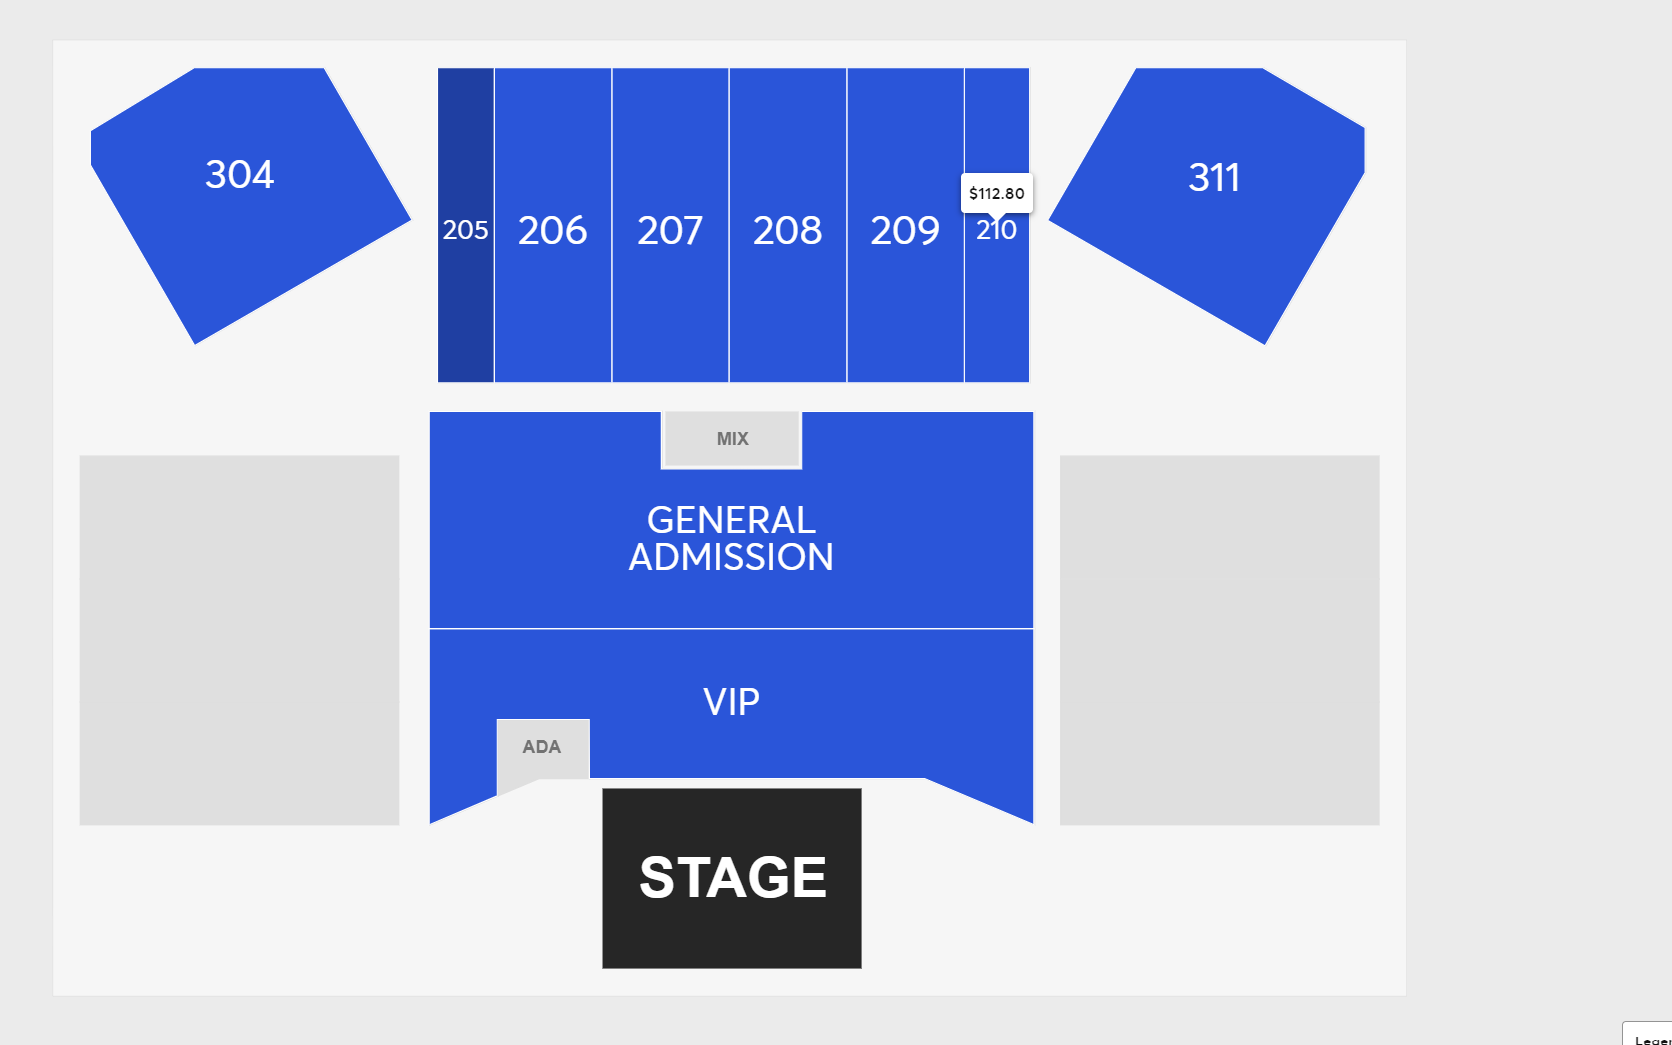 General Admission seats are priced at $92.30, while seats in the 200s are priced at $123, seats in the 300s are $102, and VIP seats are $427